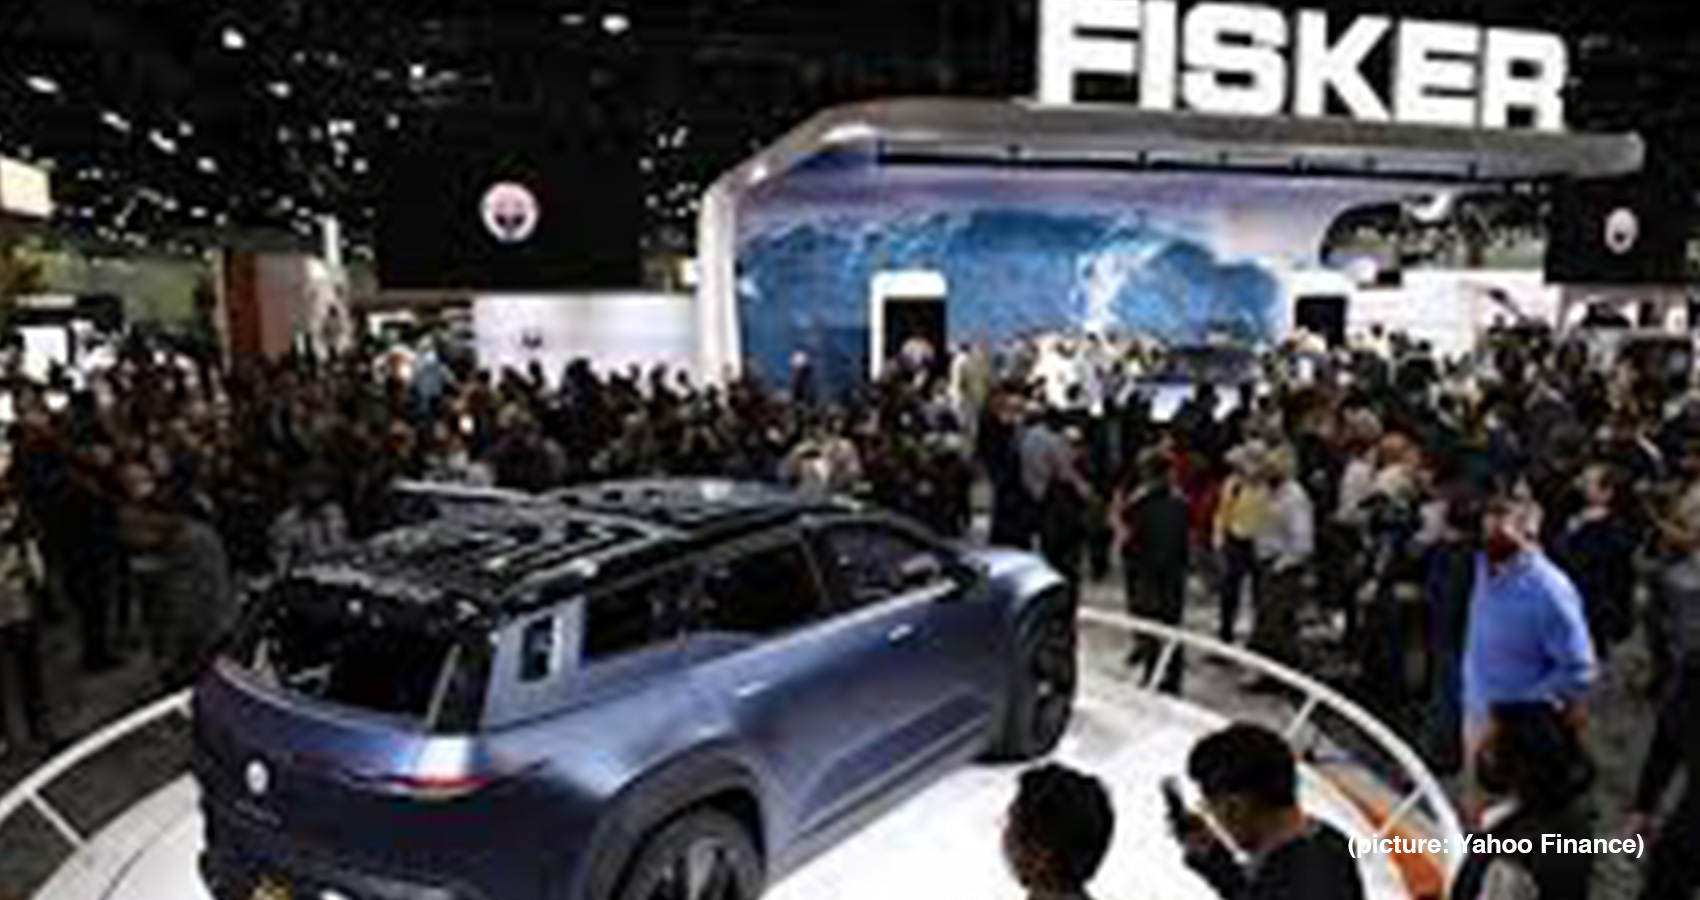 Fisker Unveils ‘World’s Most Sustainable Vehicle’ As Electric Vehicle Competition Heats Up